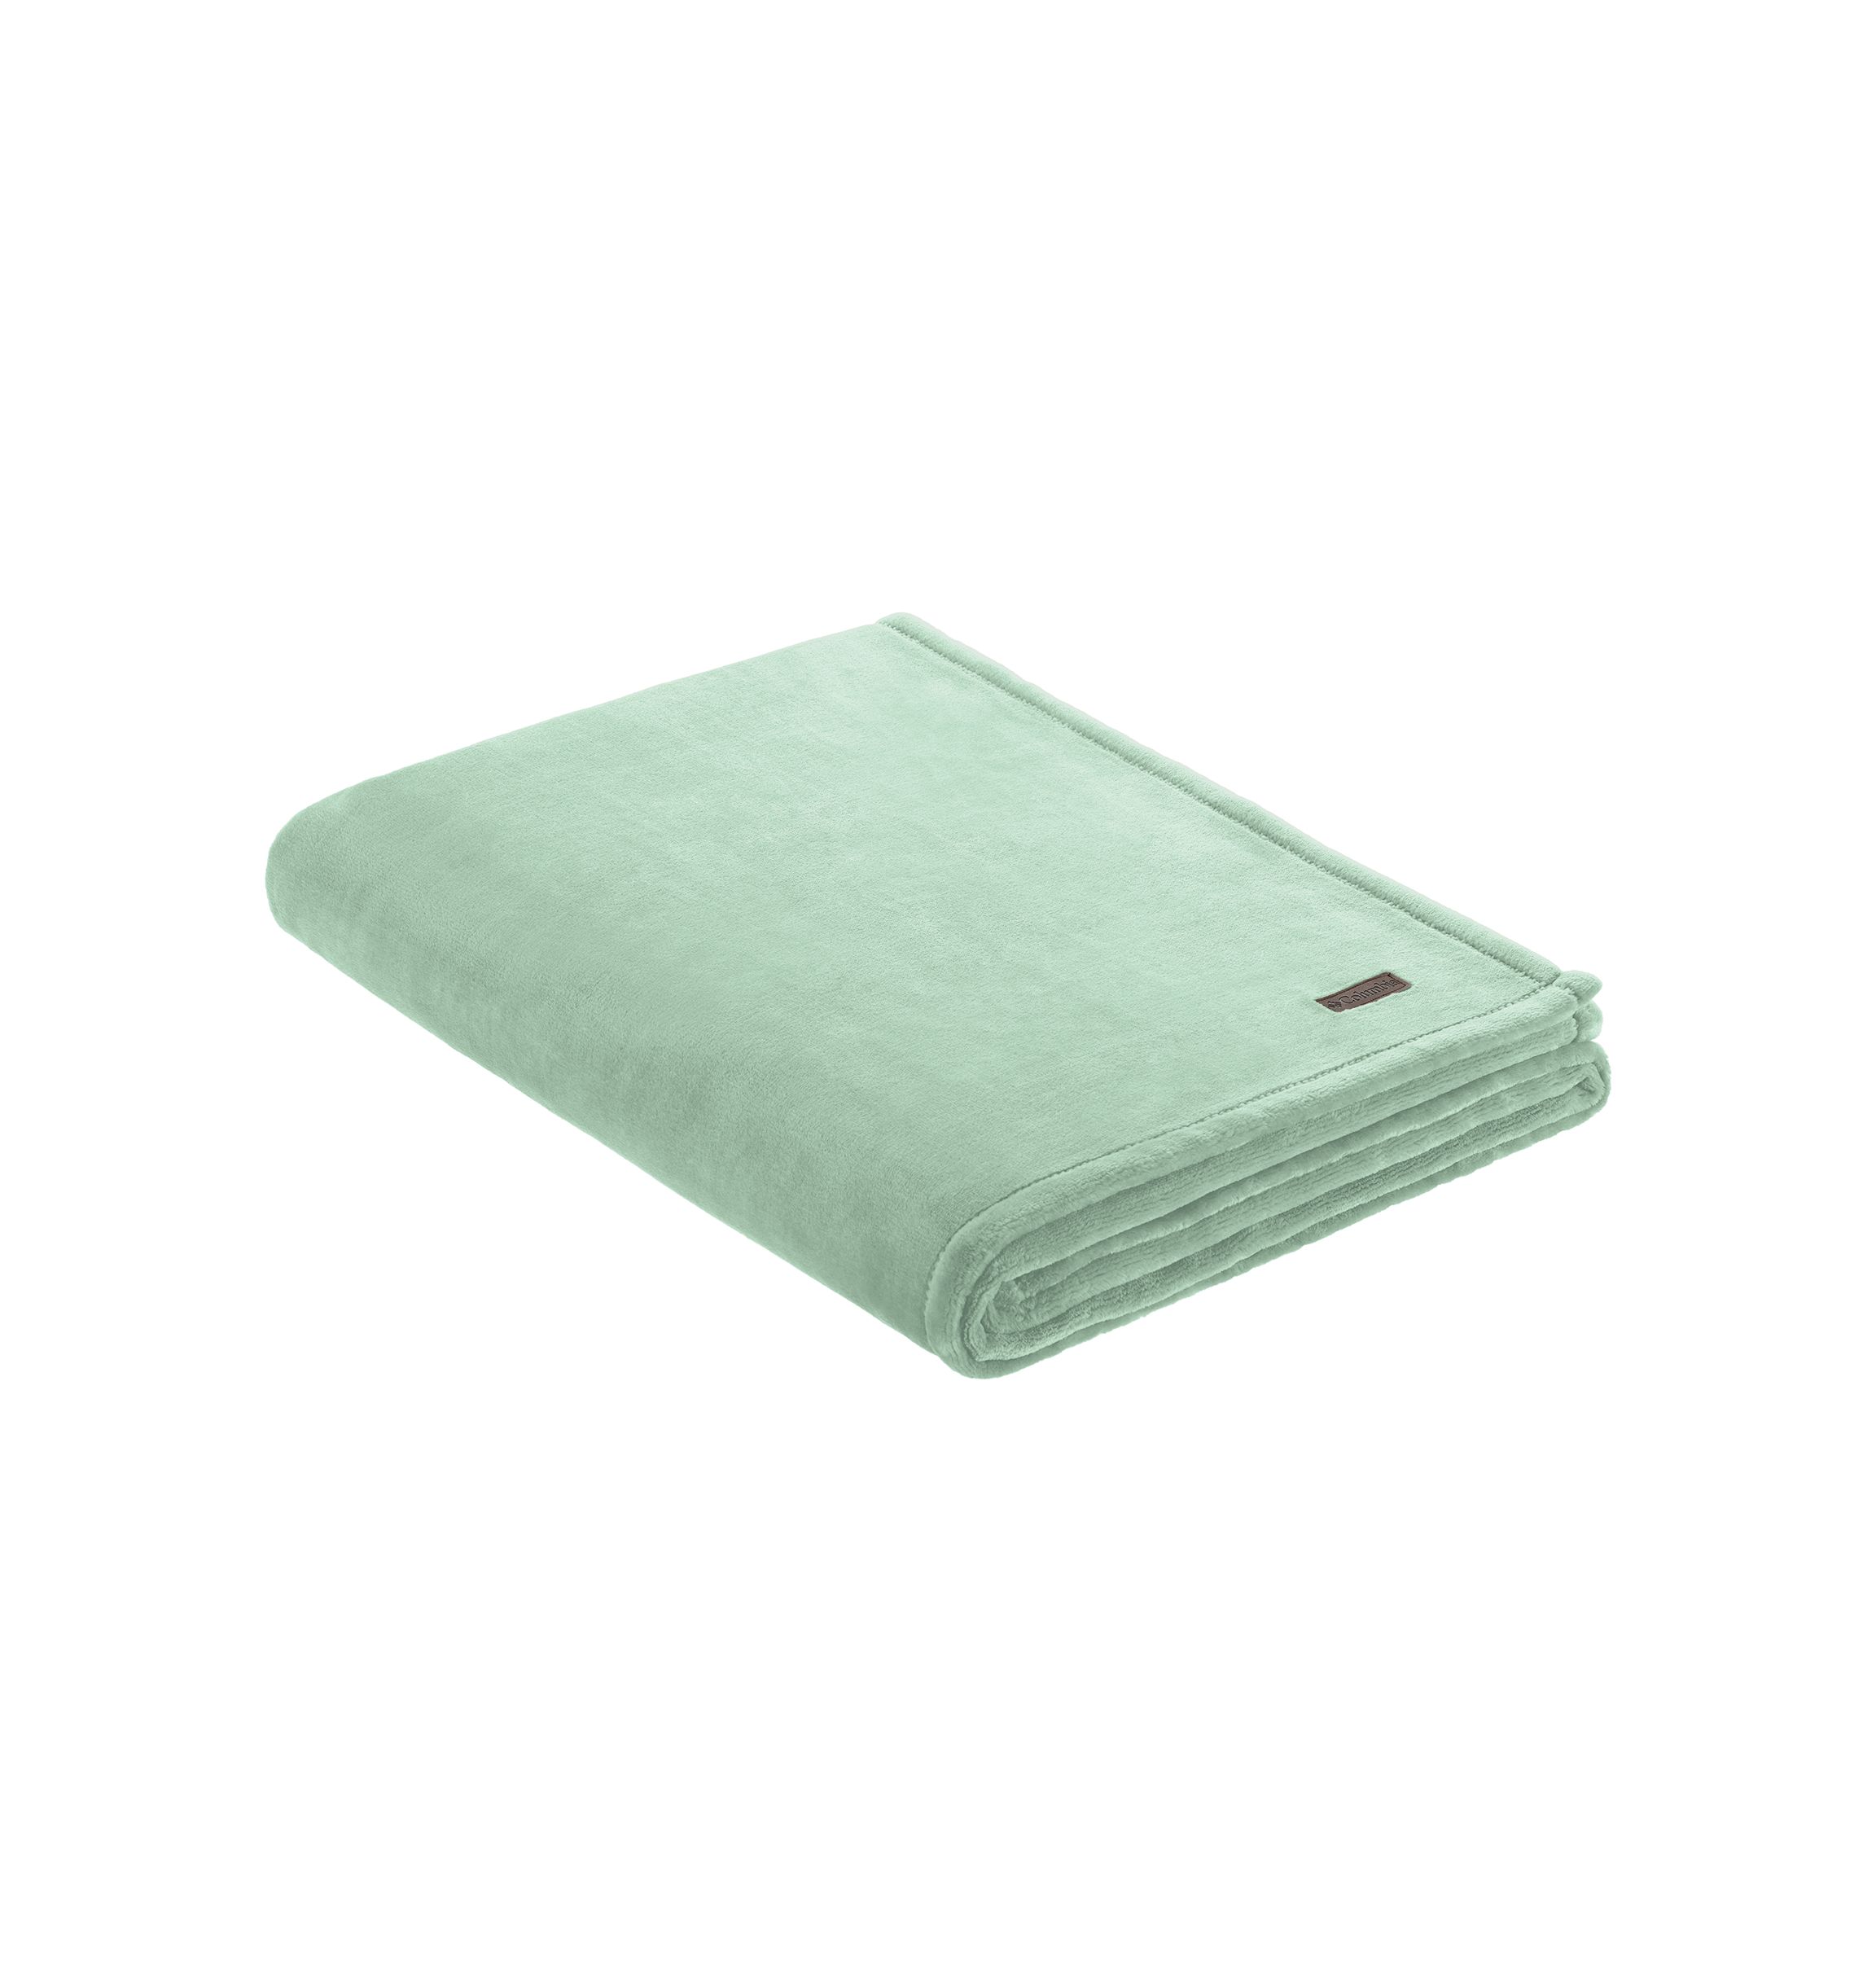 100% Cashmere|4 Ply|Throw/Blanket|Hand Loomed|Nepal|2 Color|Turquoise/Snow 